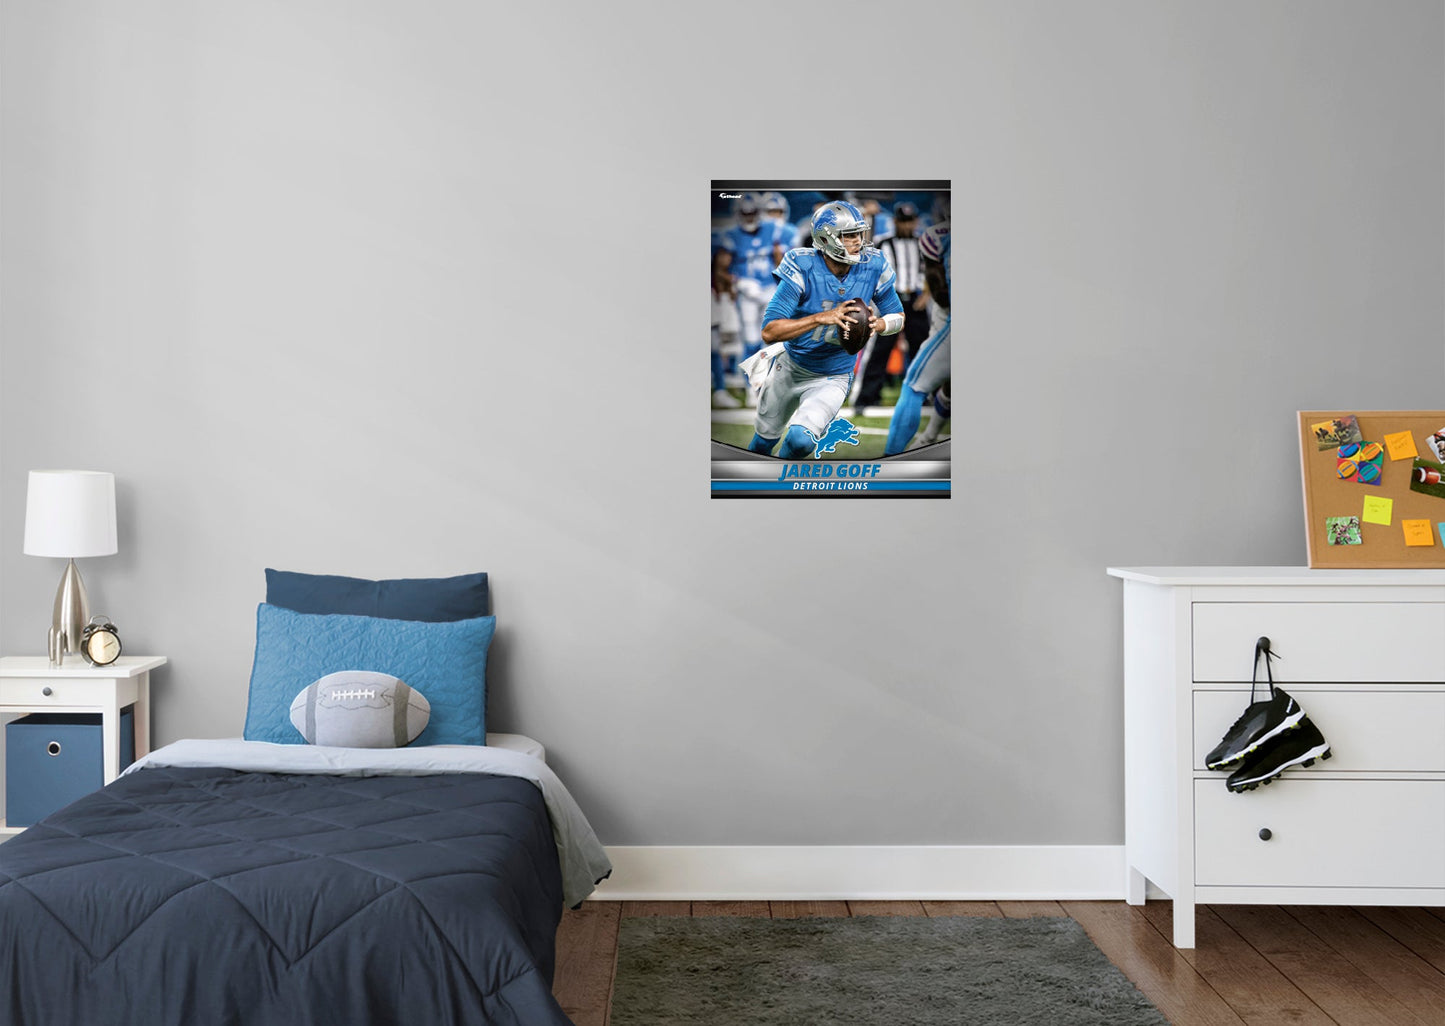 Detroit Lions: Jared Goff GameStar - Officially Licensed NFL Removable Adhesive Decal